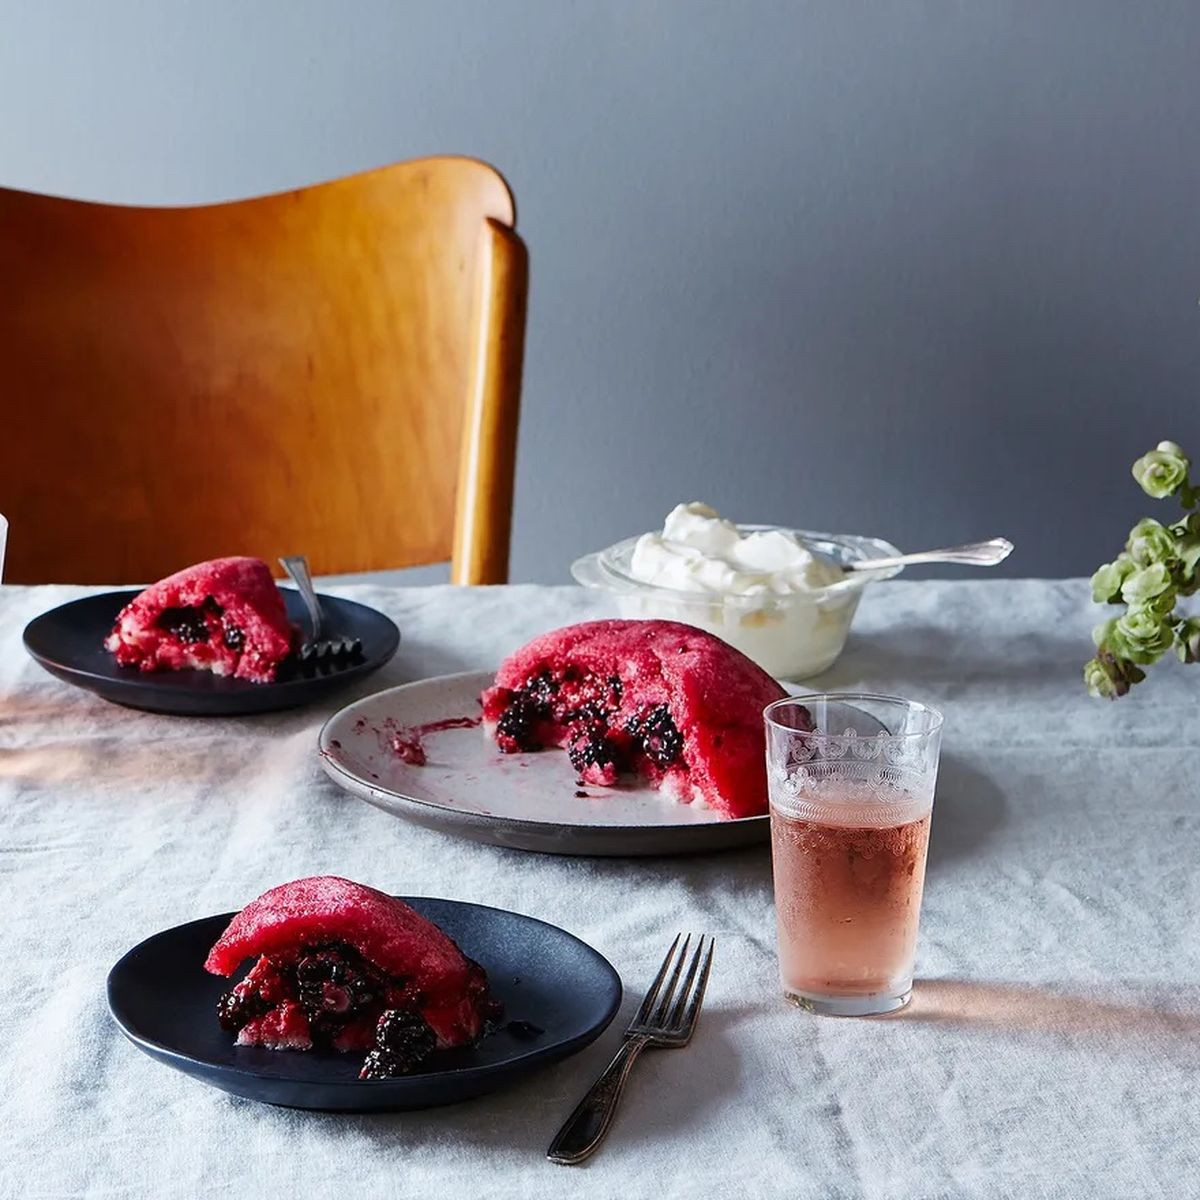 How to Make an English Summer Pudding Bomb